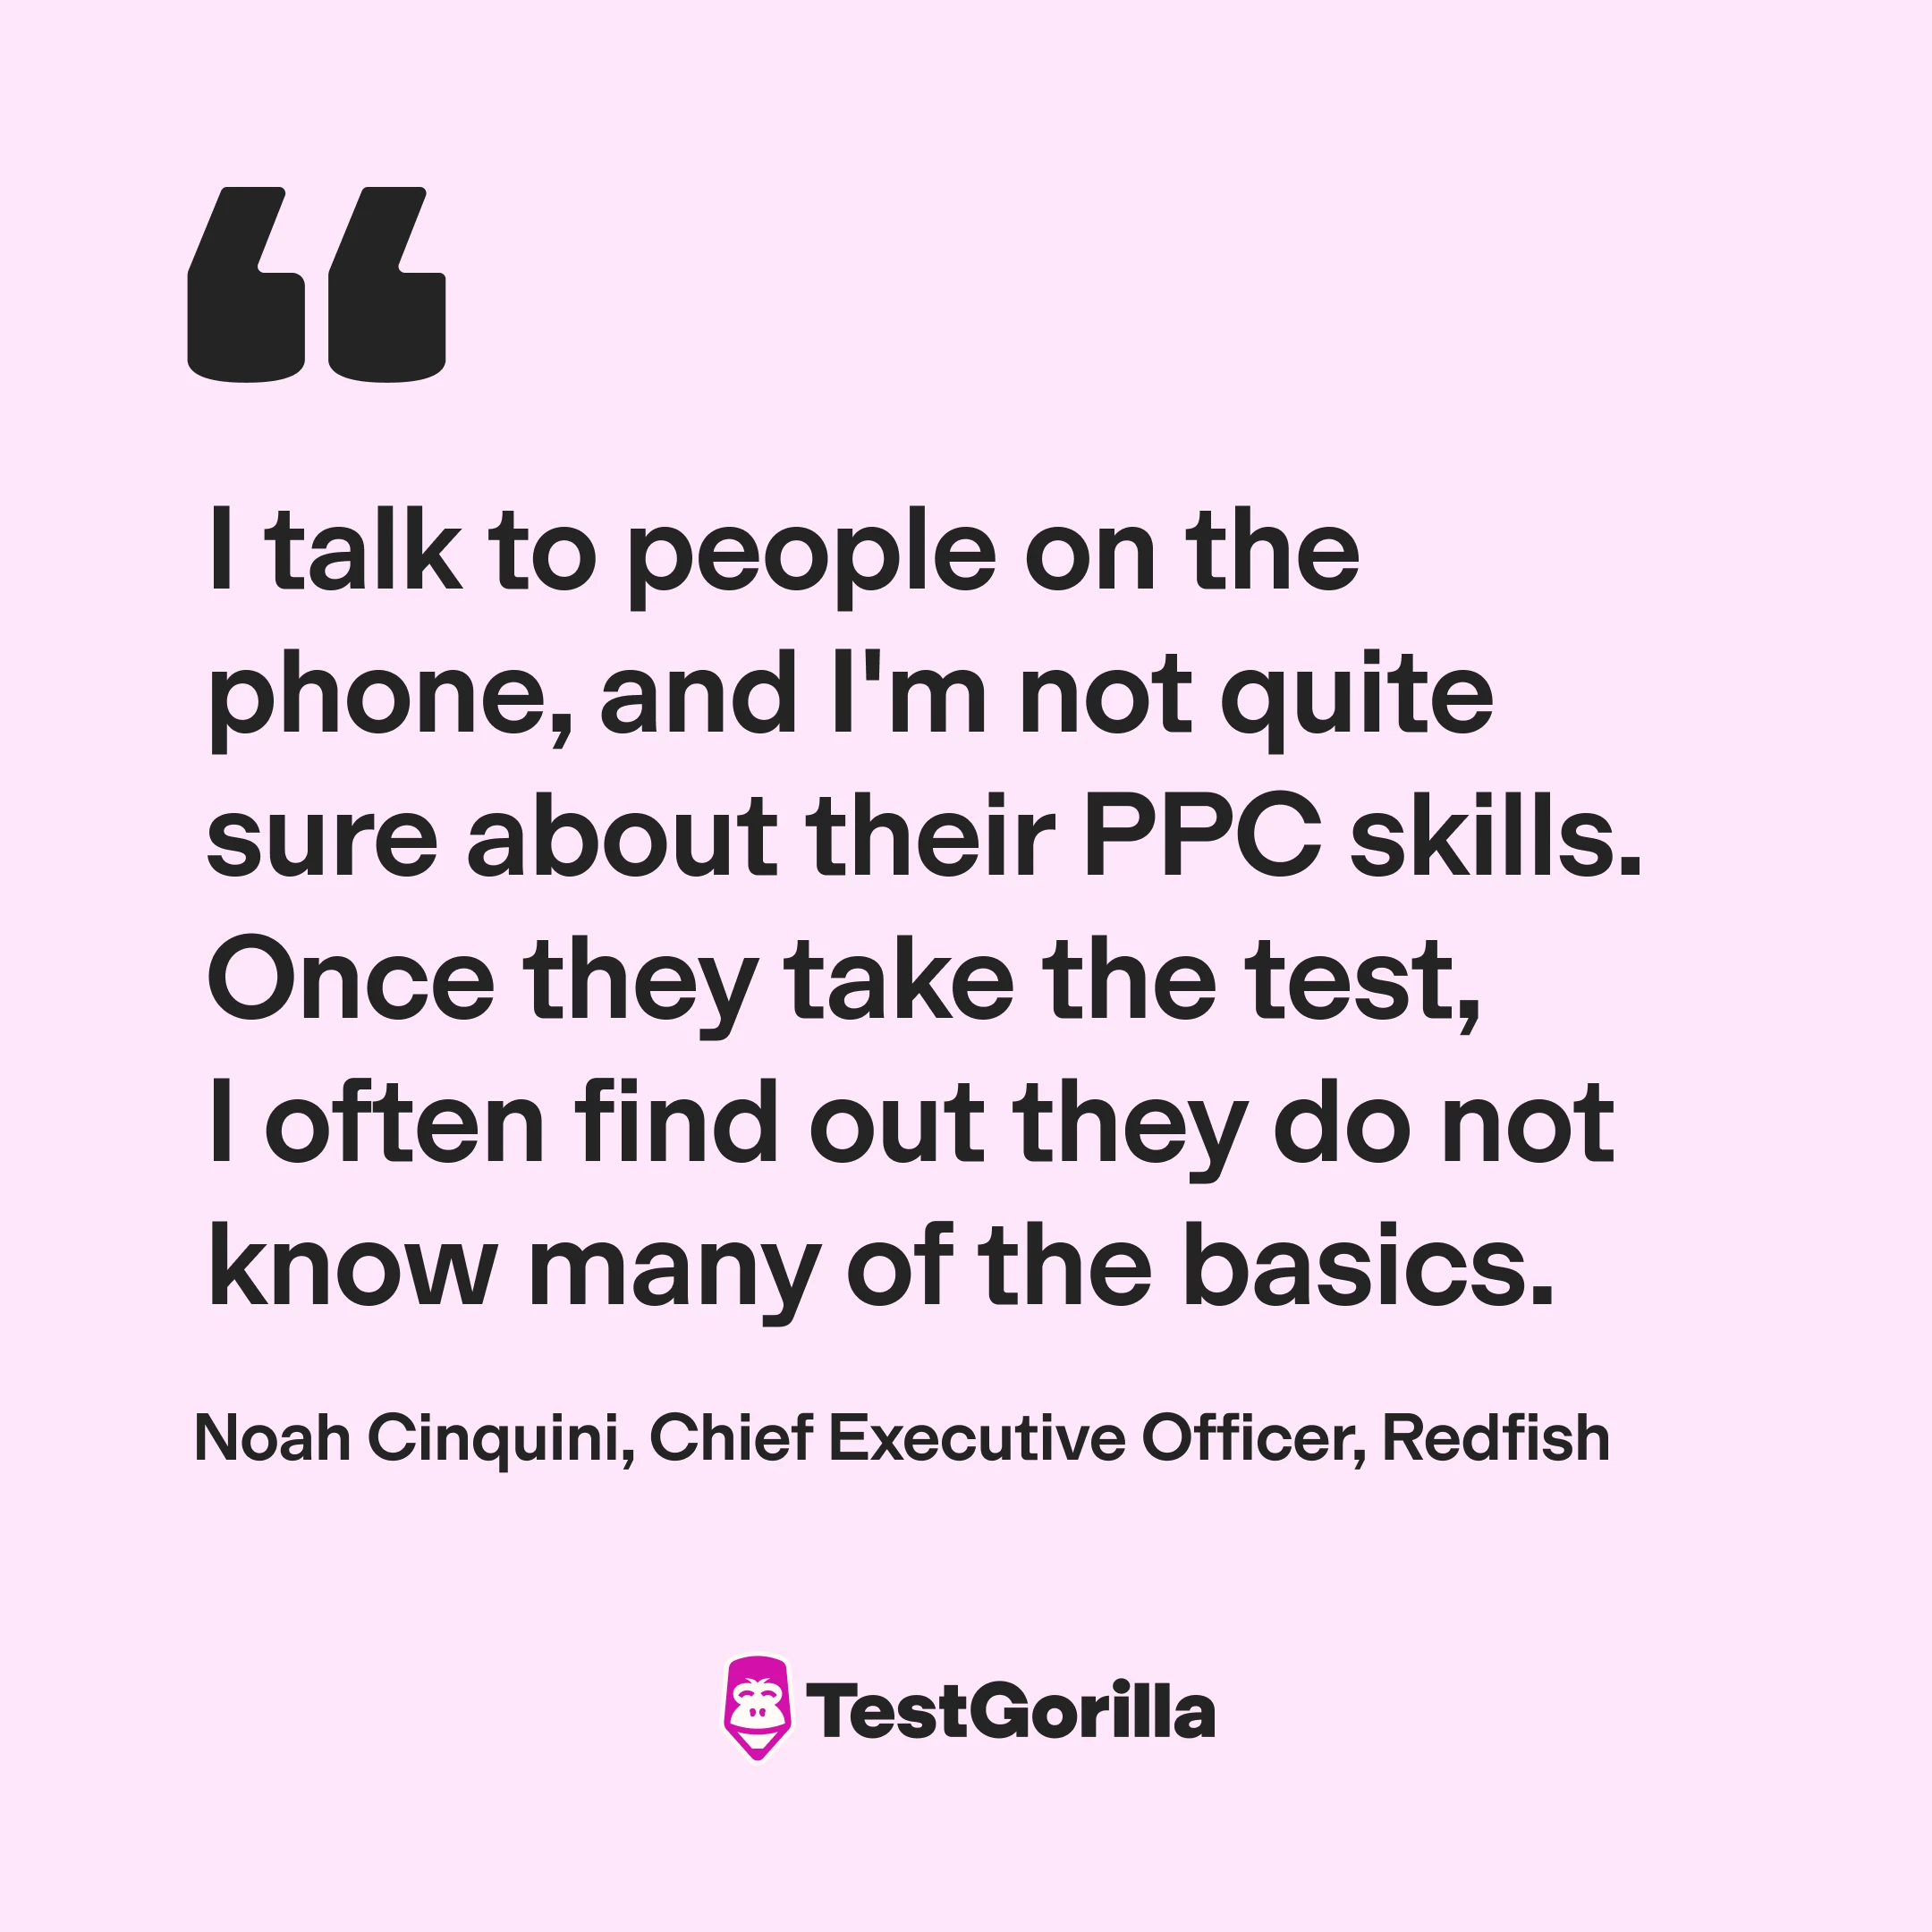 Noah Cinquini on how skills-based hiring enables employing people based on their ability